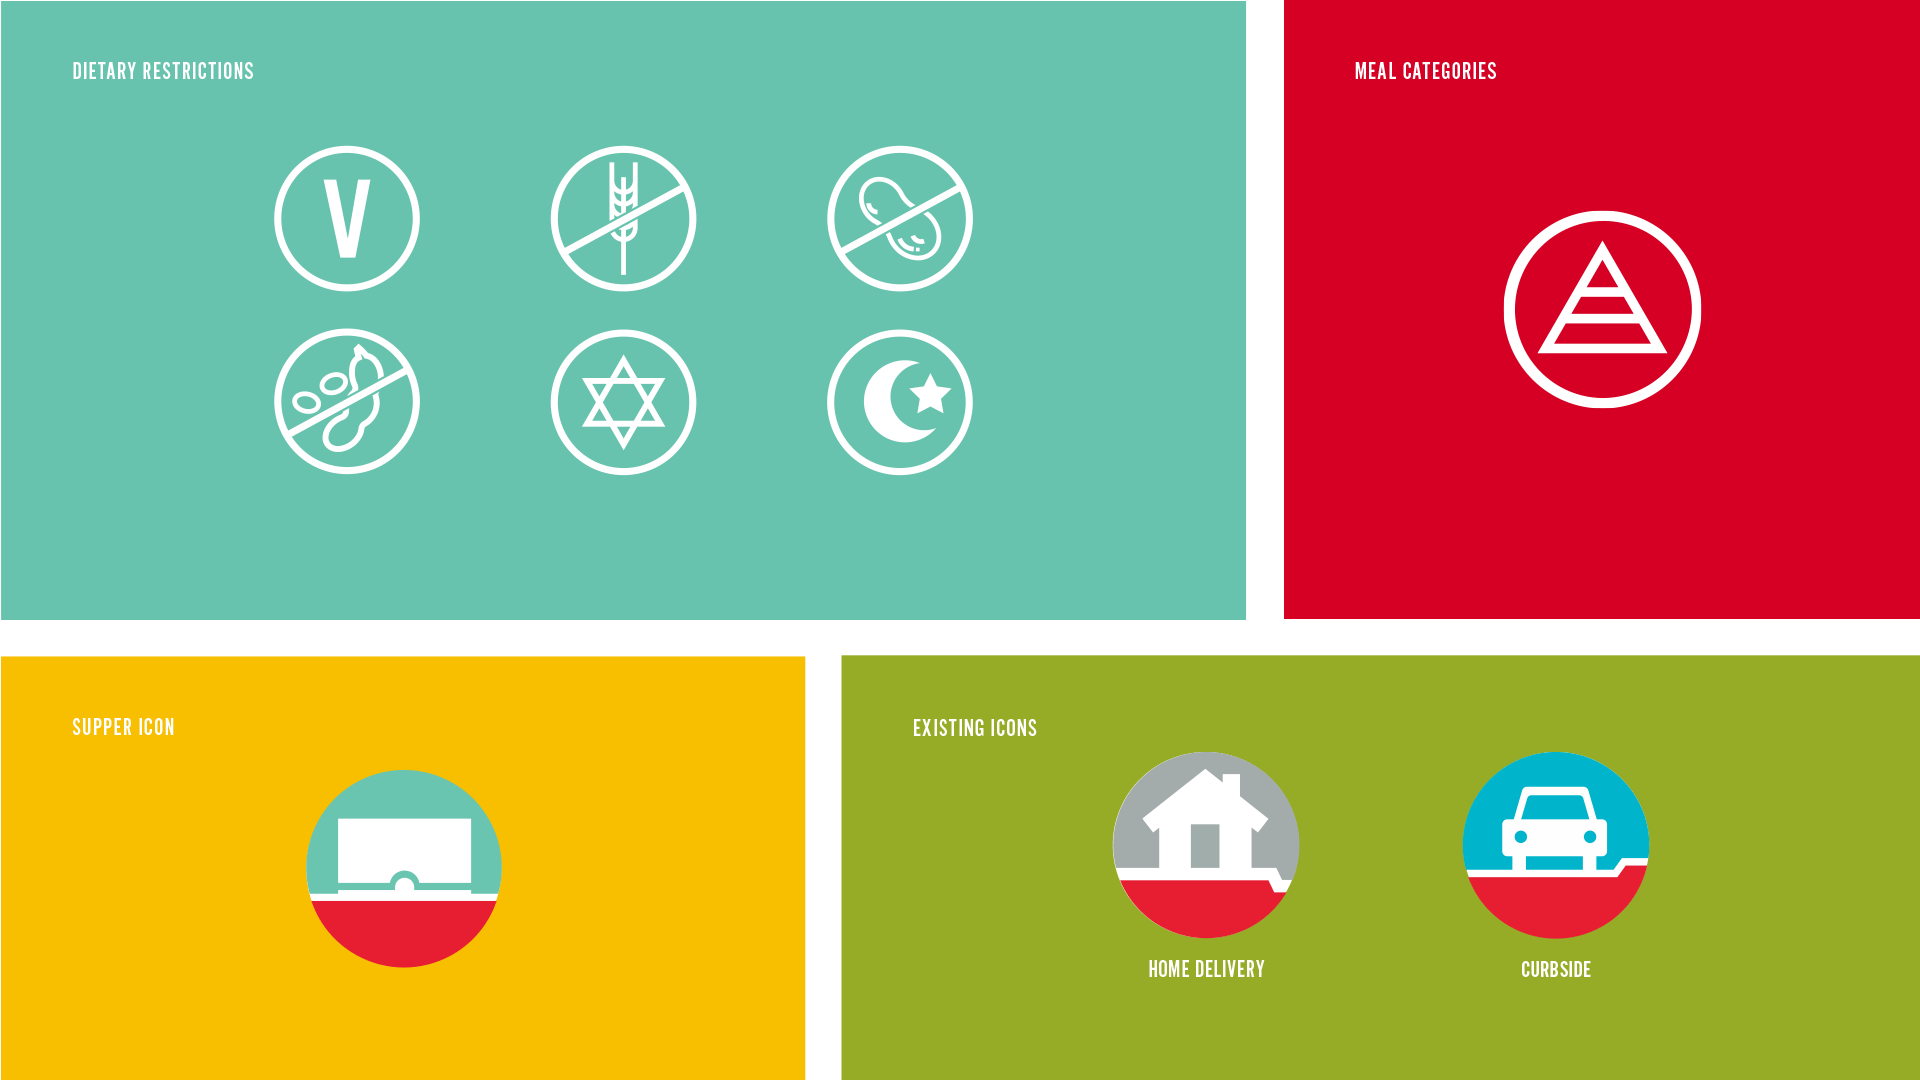 heb_supper_icons_2.0